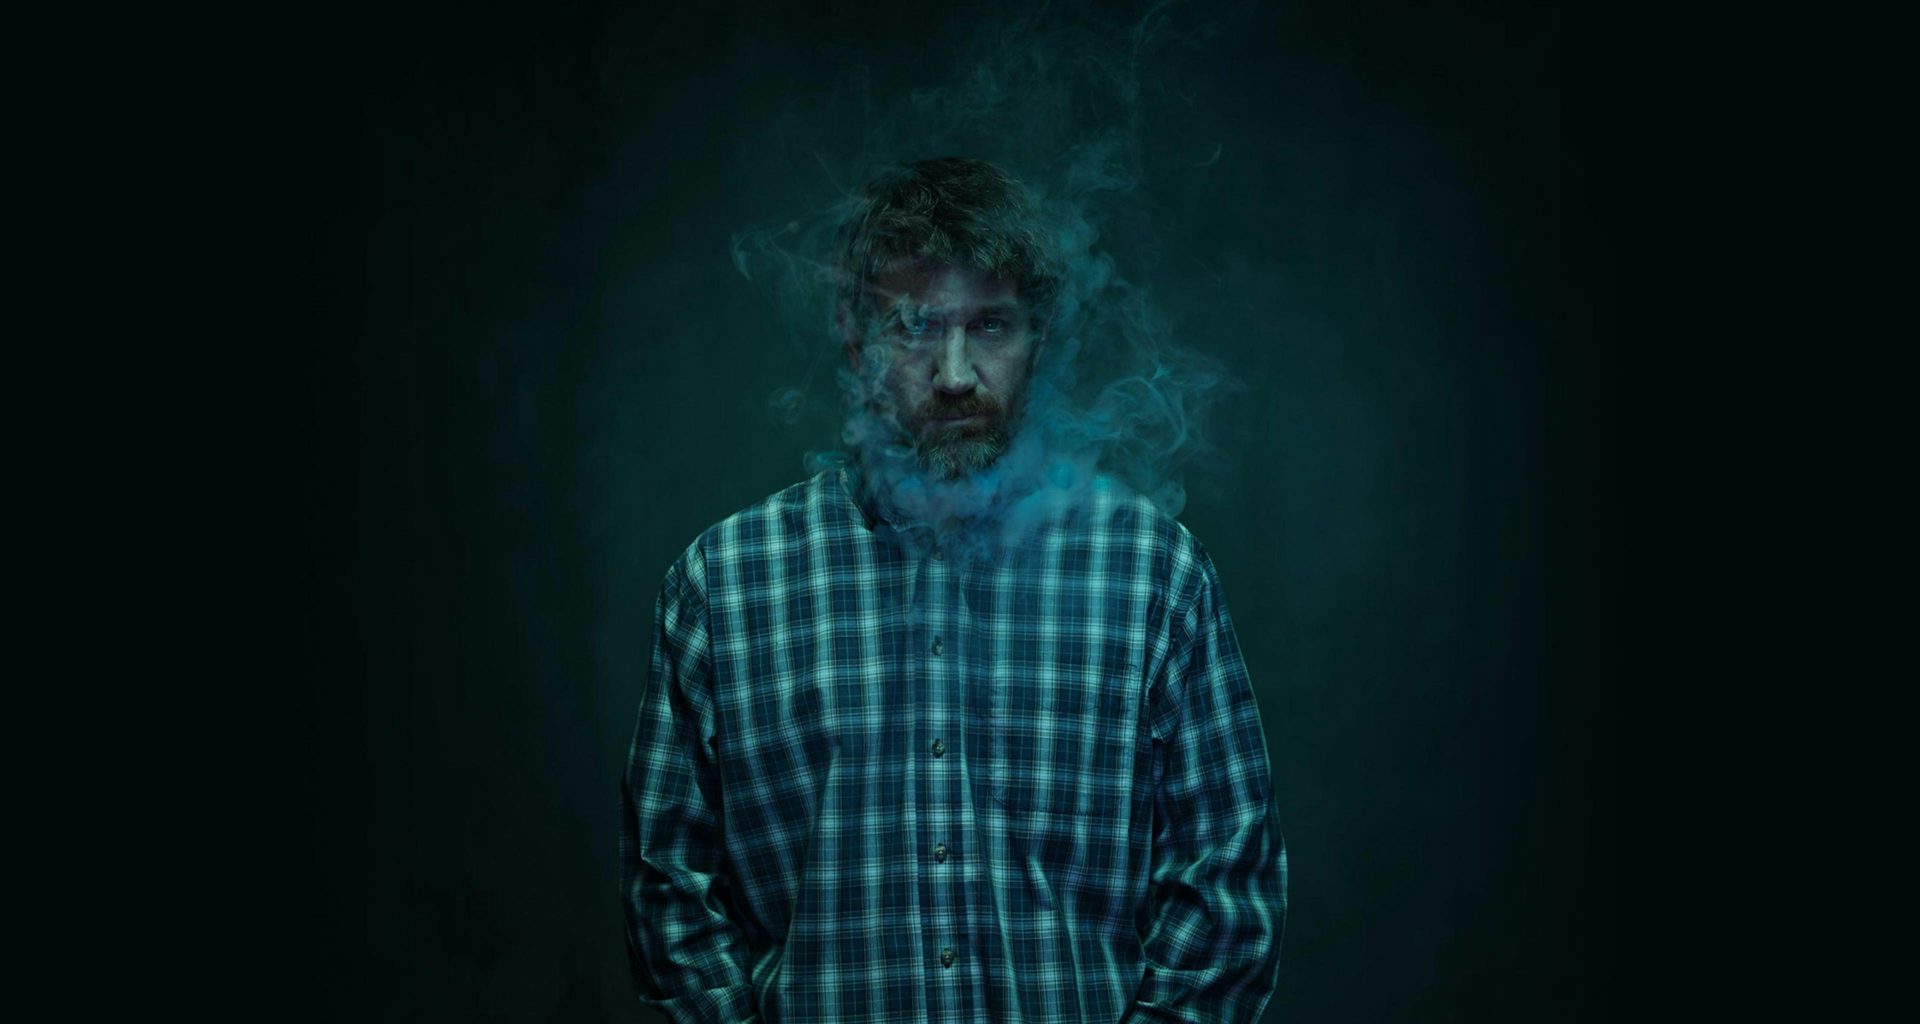 Man in dark background with smoke around his face